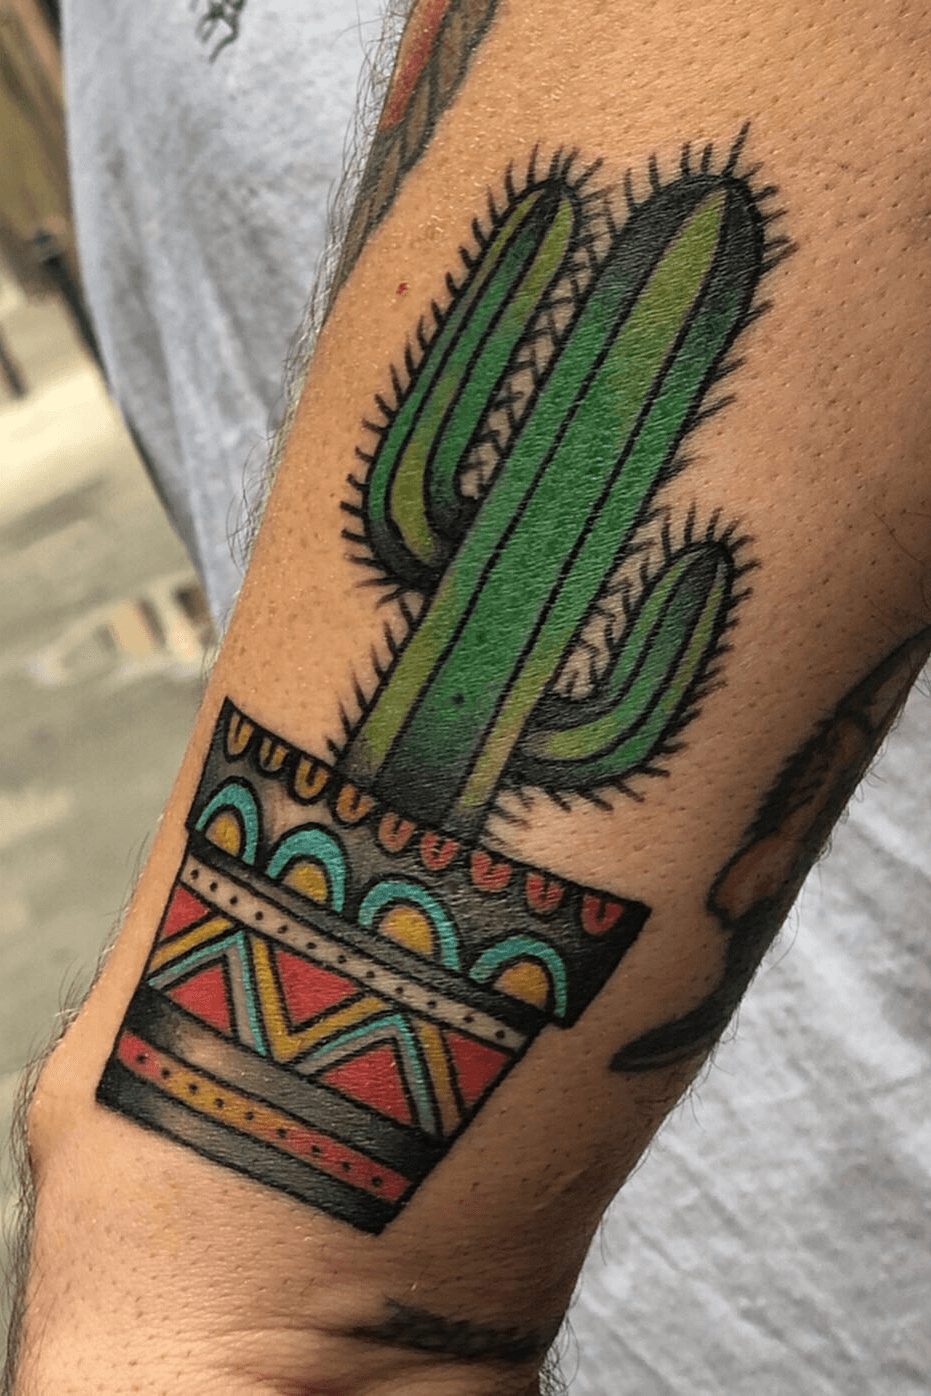 Tattoo uploaded by Andrea Magrassi  Traditional cactus  Tattoodo